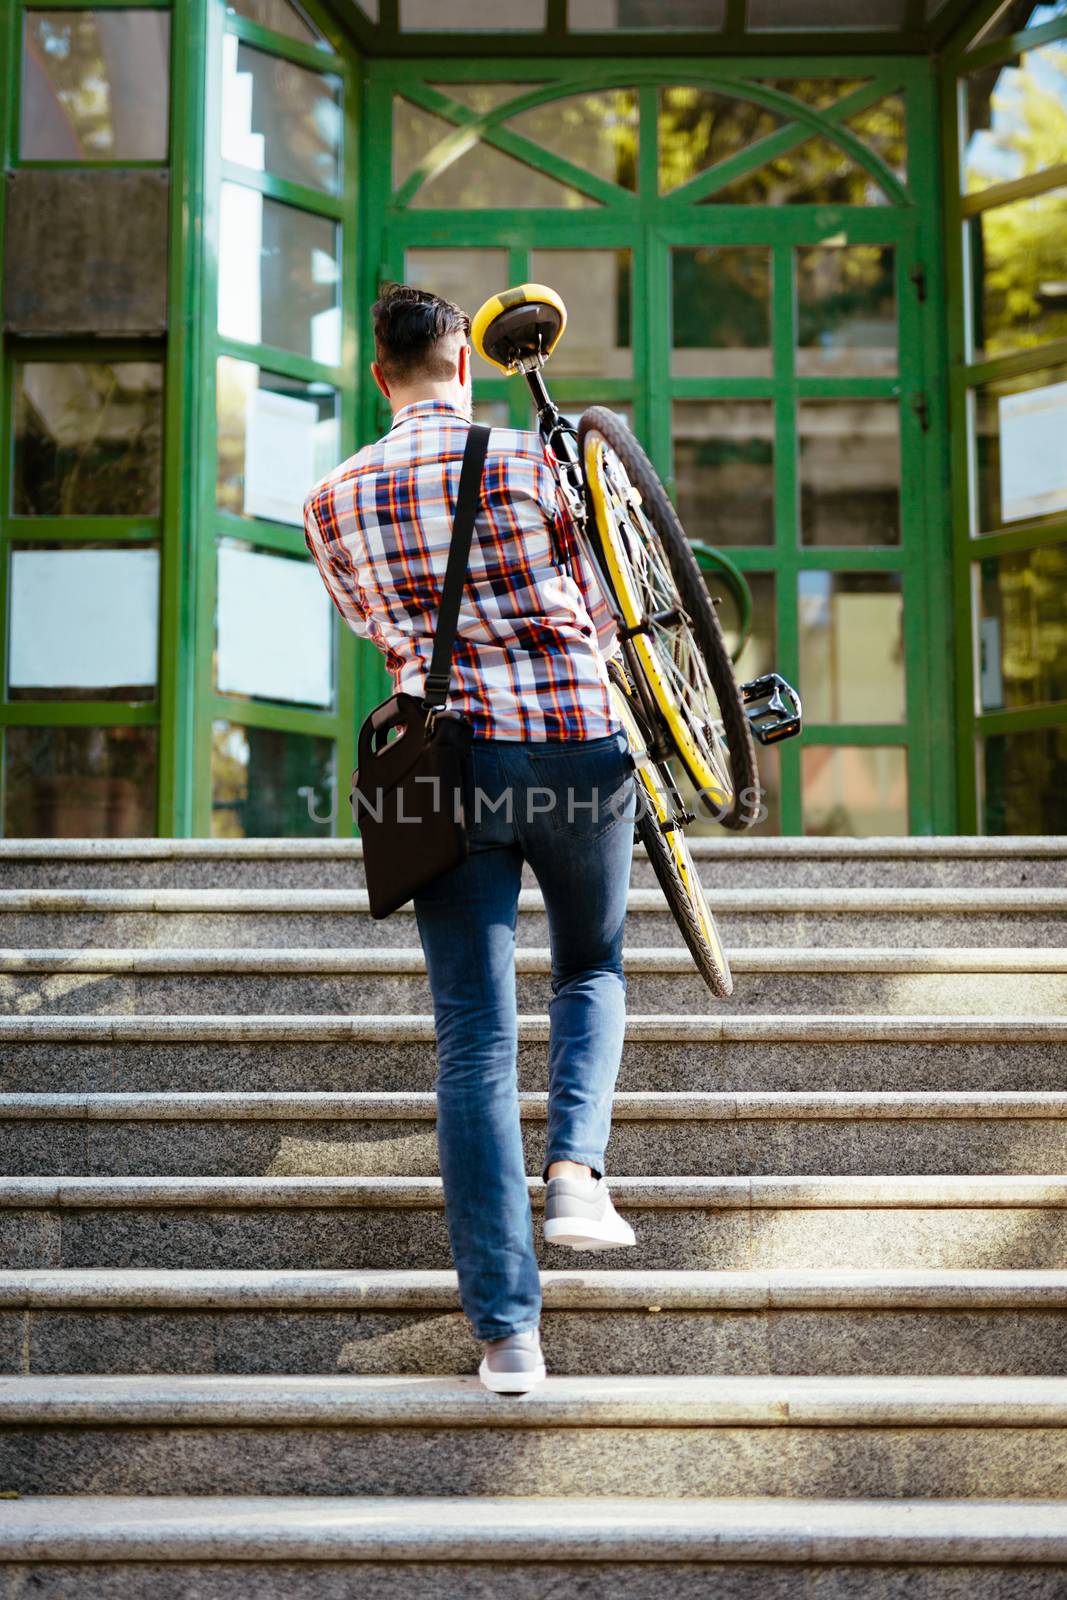 Casual businessman going to work by bicycle. He is carrying the bike upstairs to the entrance of the office building. Rear view.